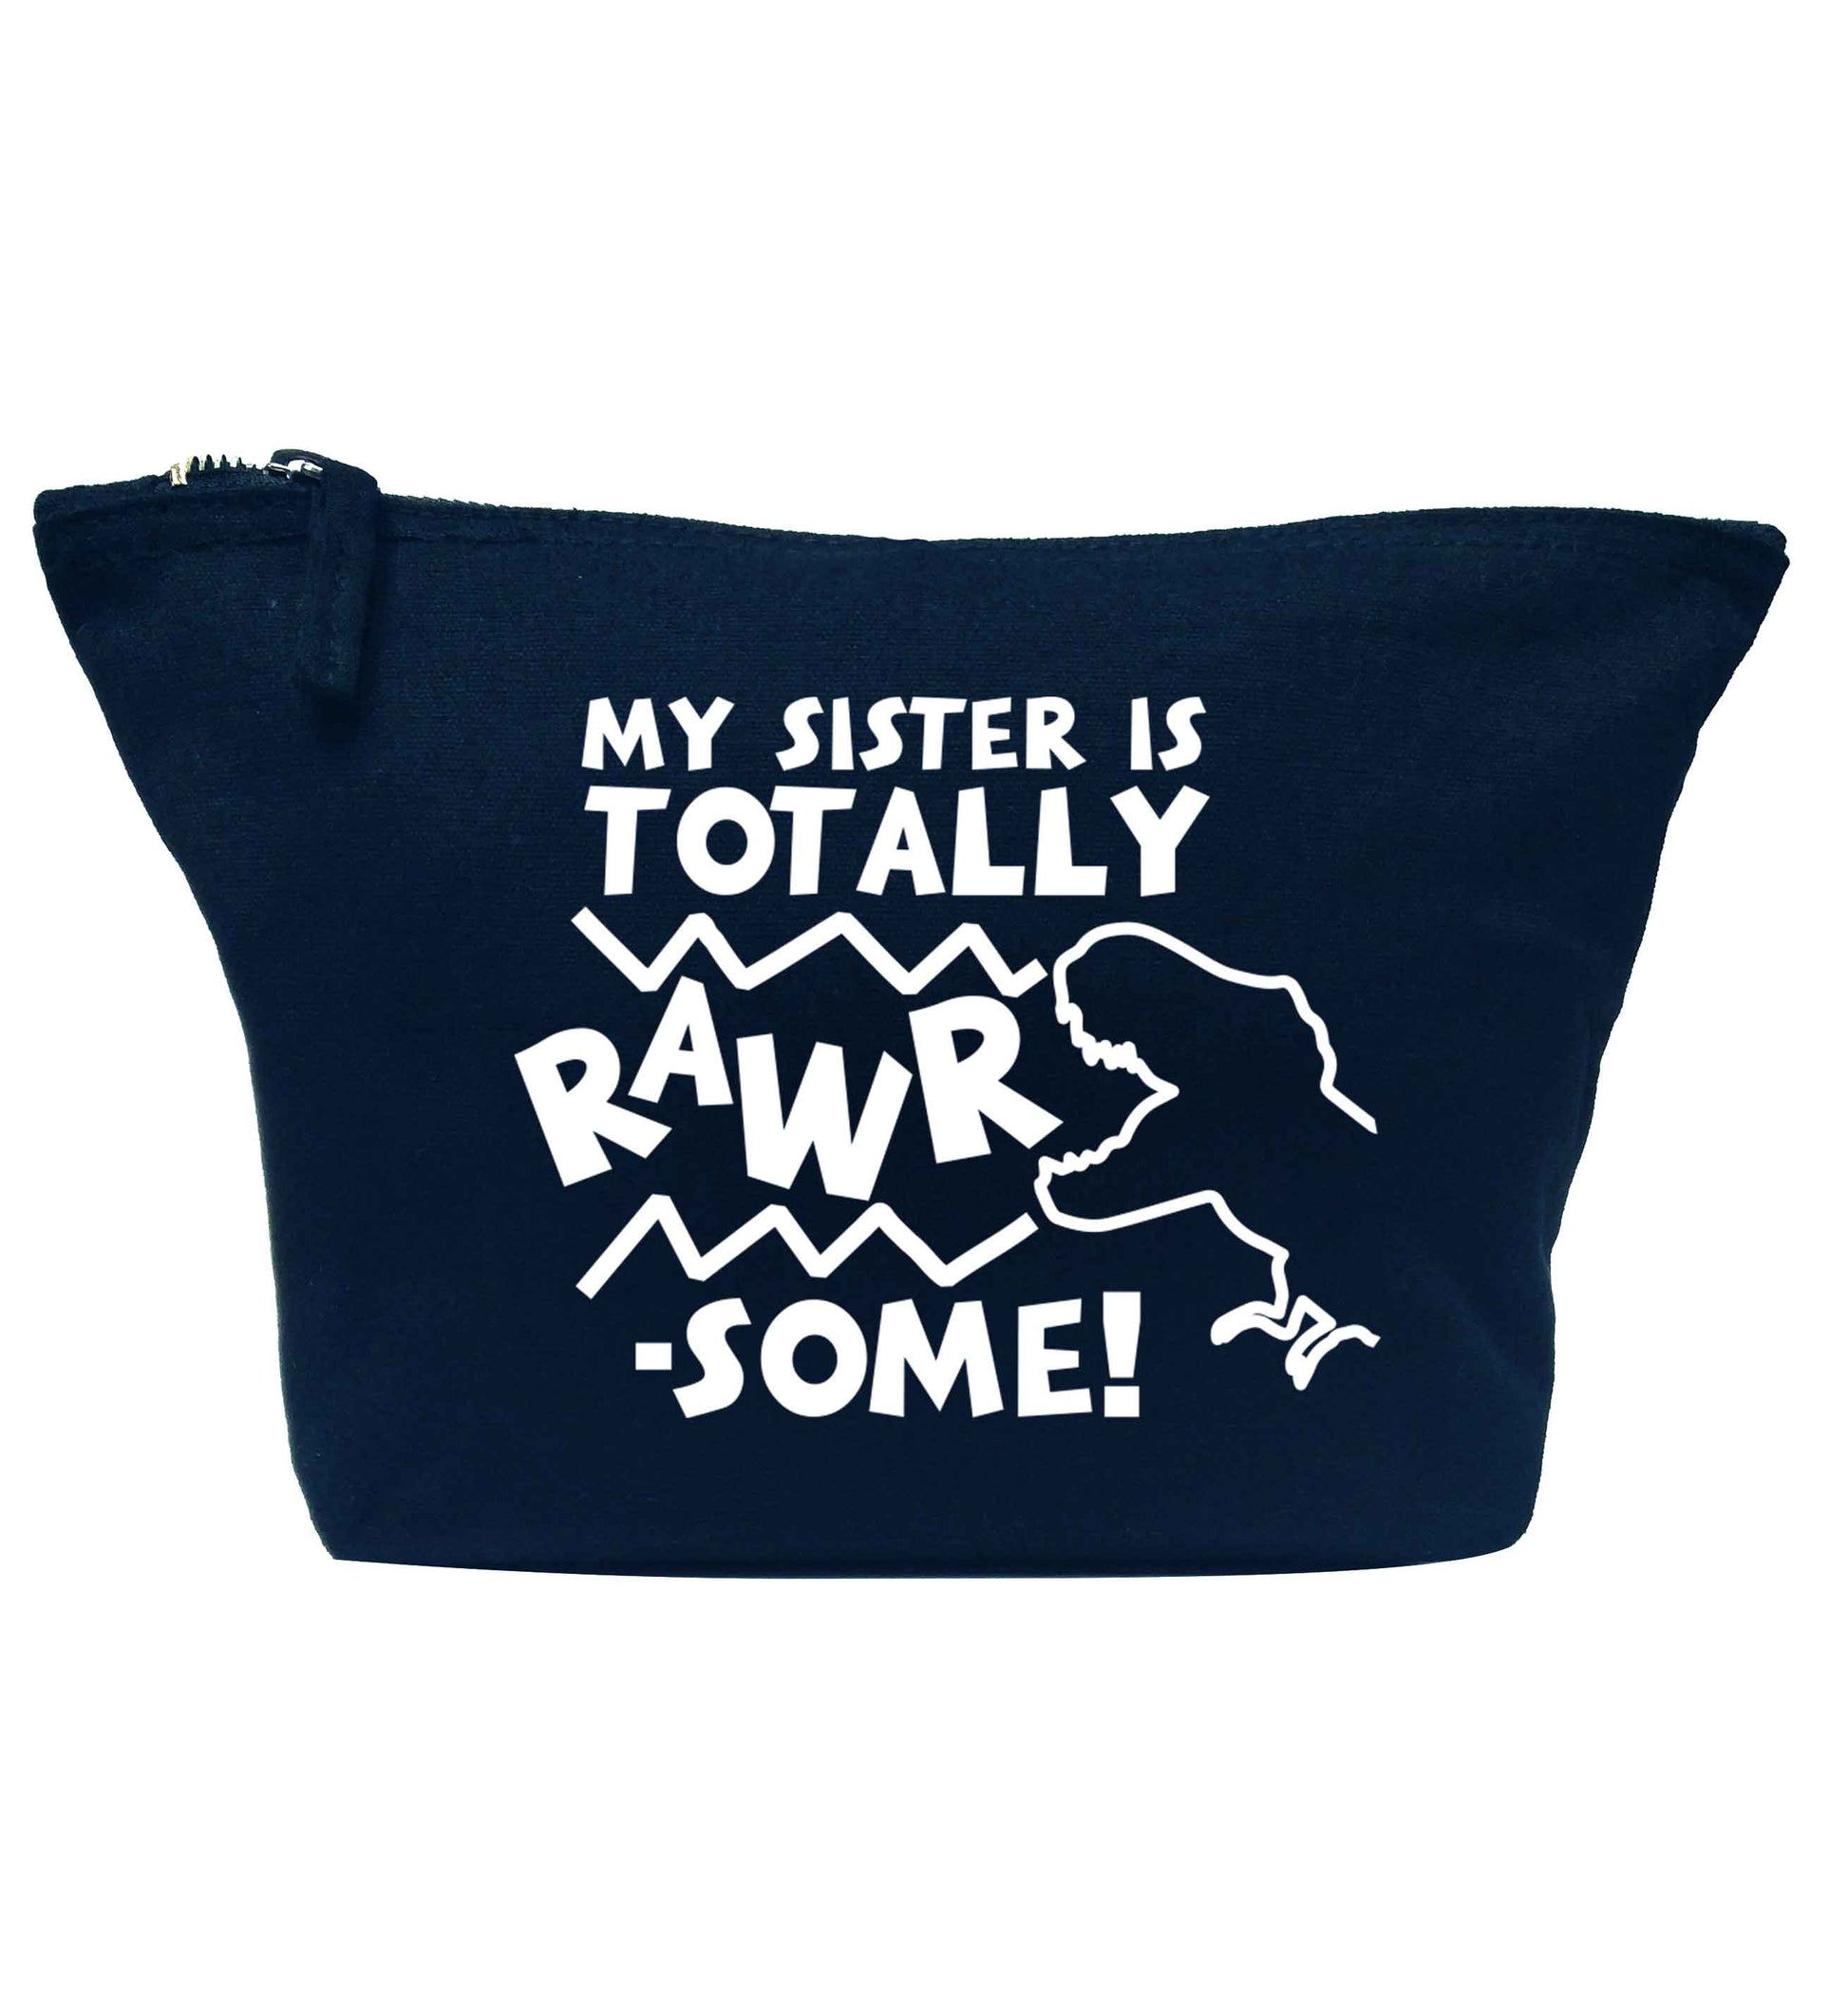 My sister is totally rawrsome navy makeup bag